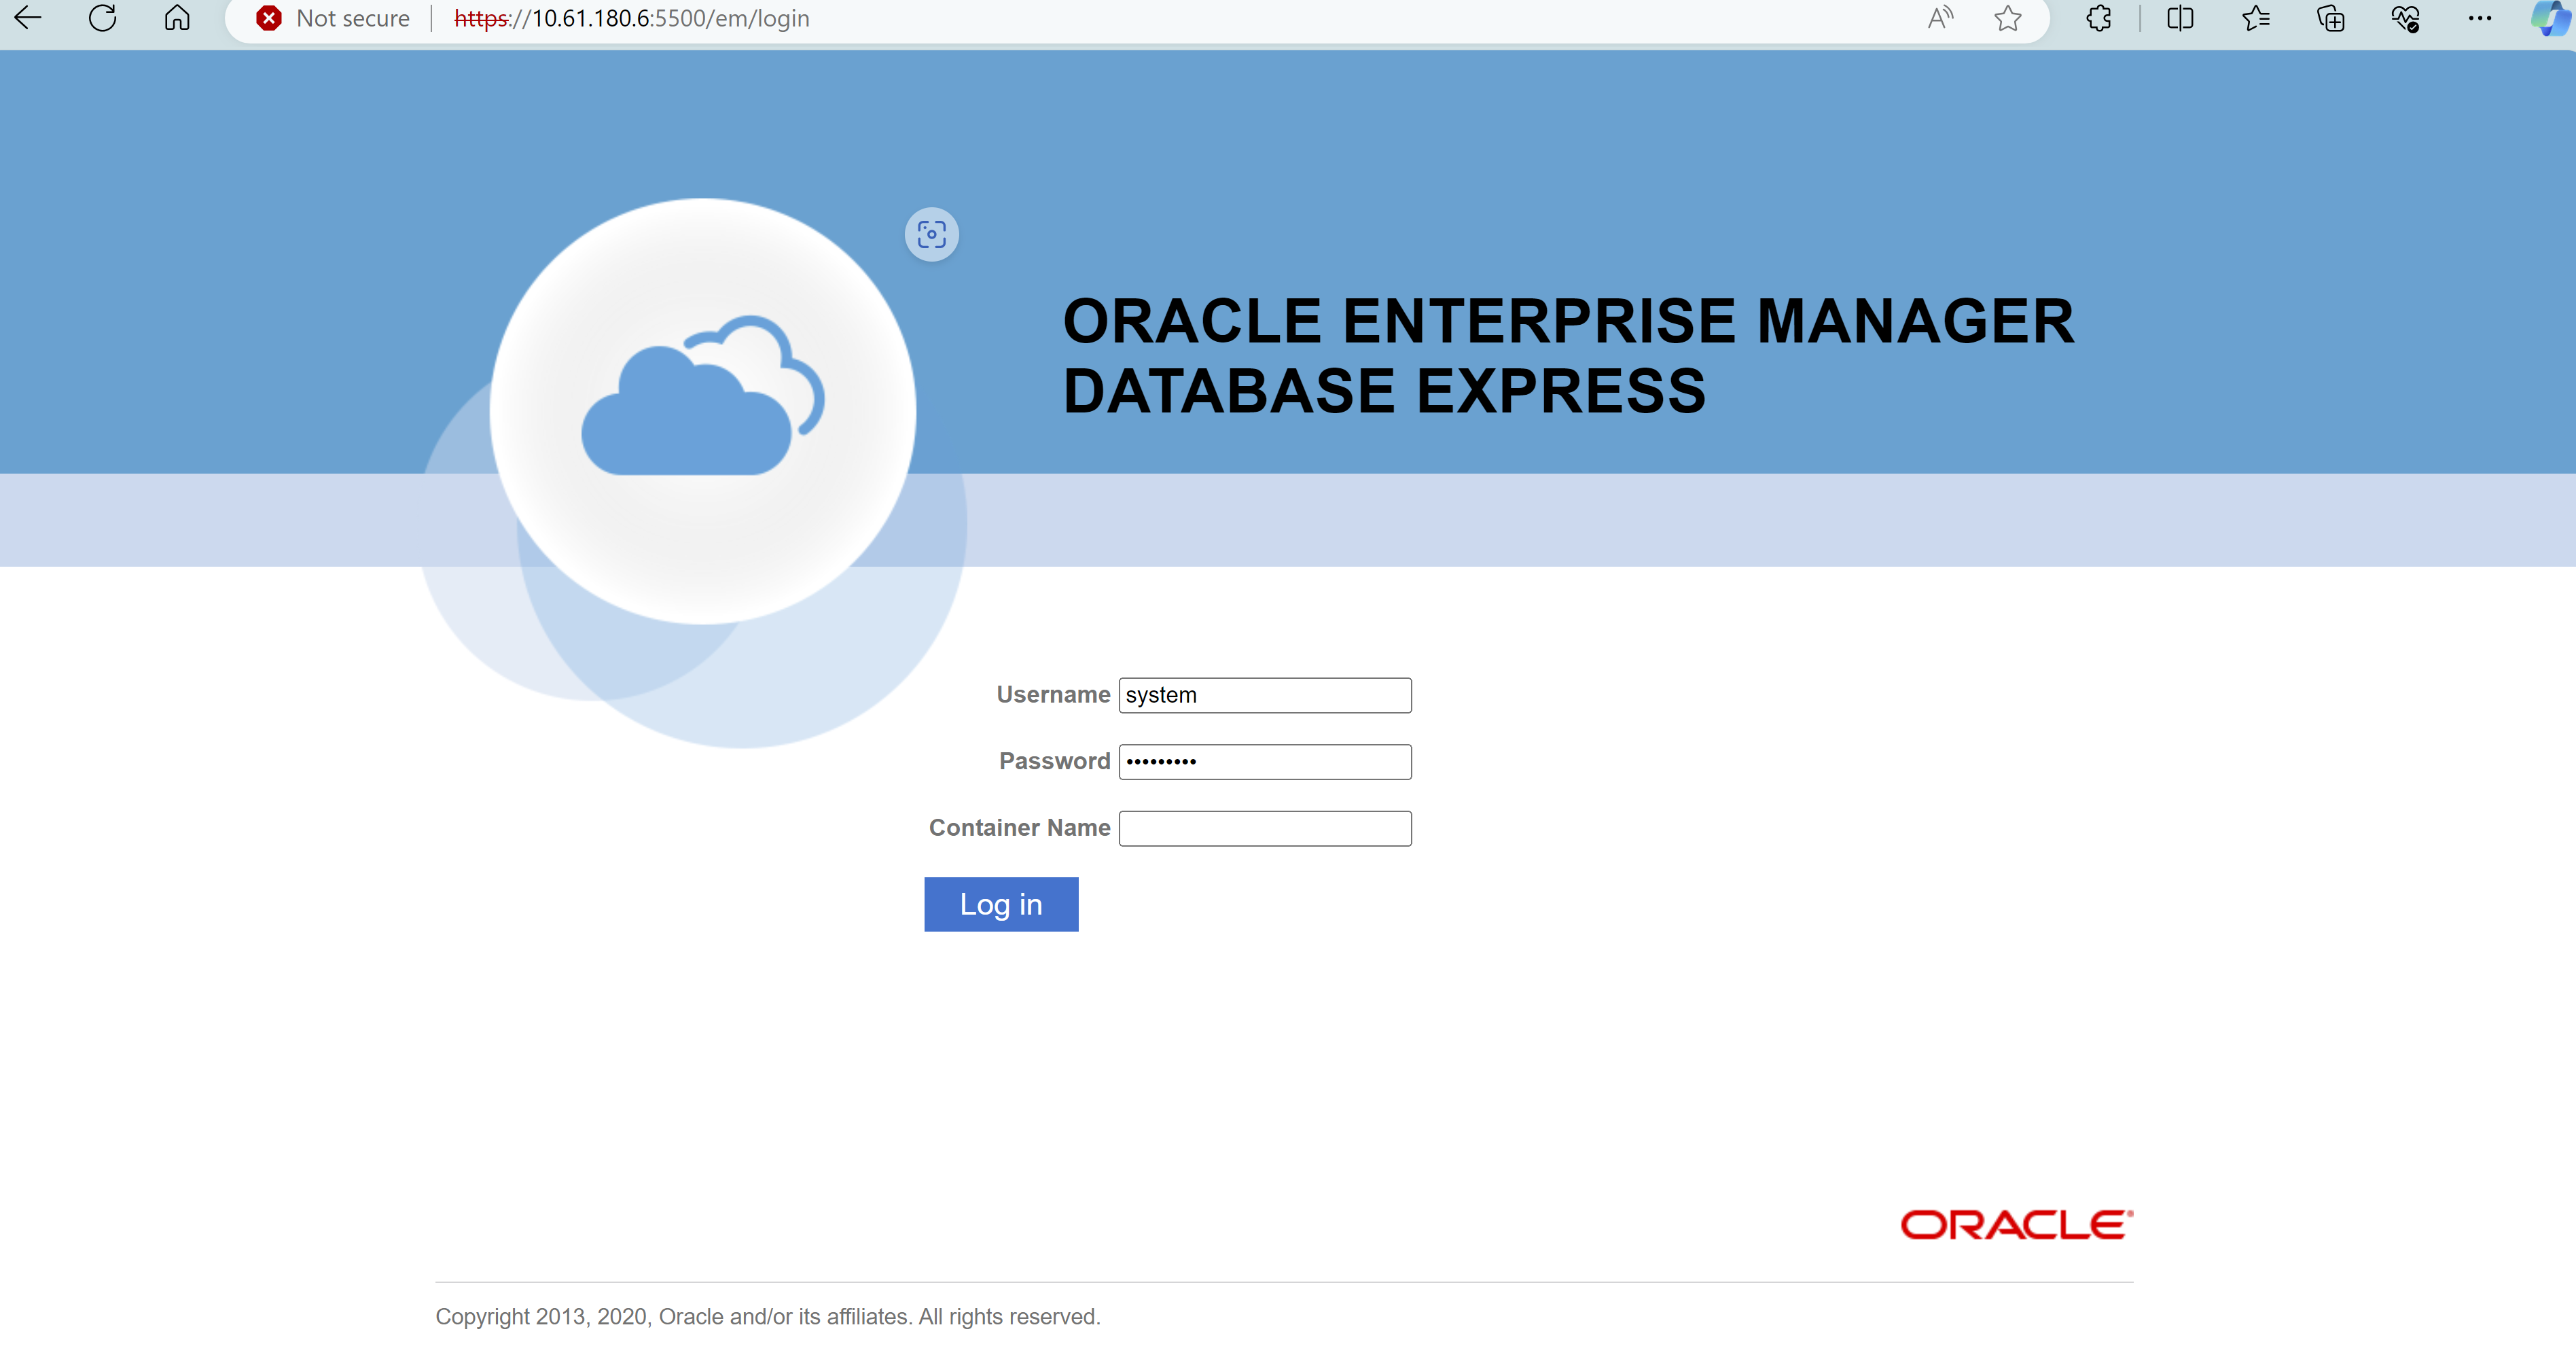 This image provides login screen for Oracle Enterprise Manager Express